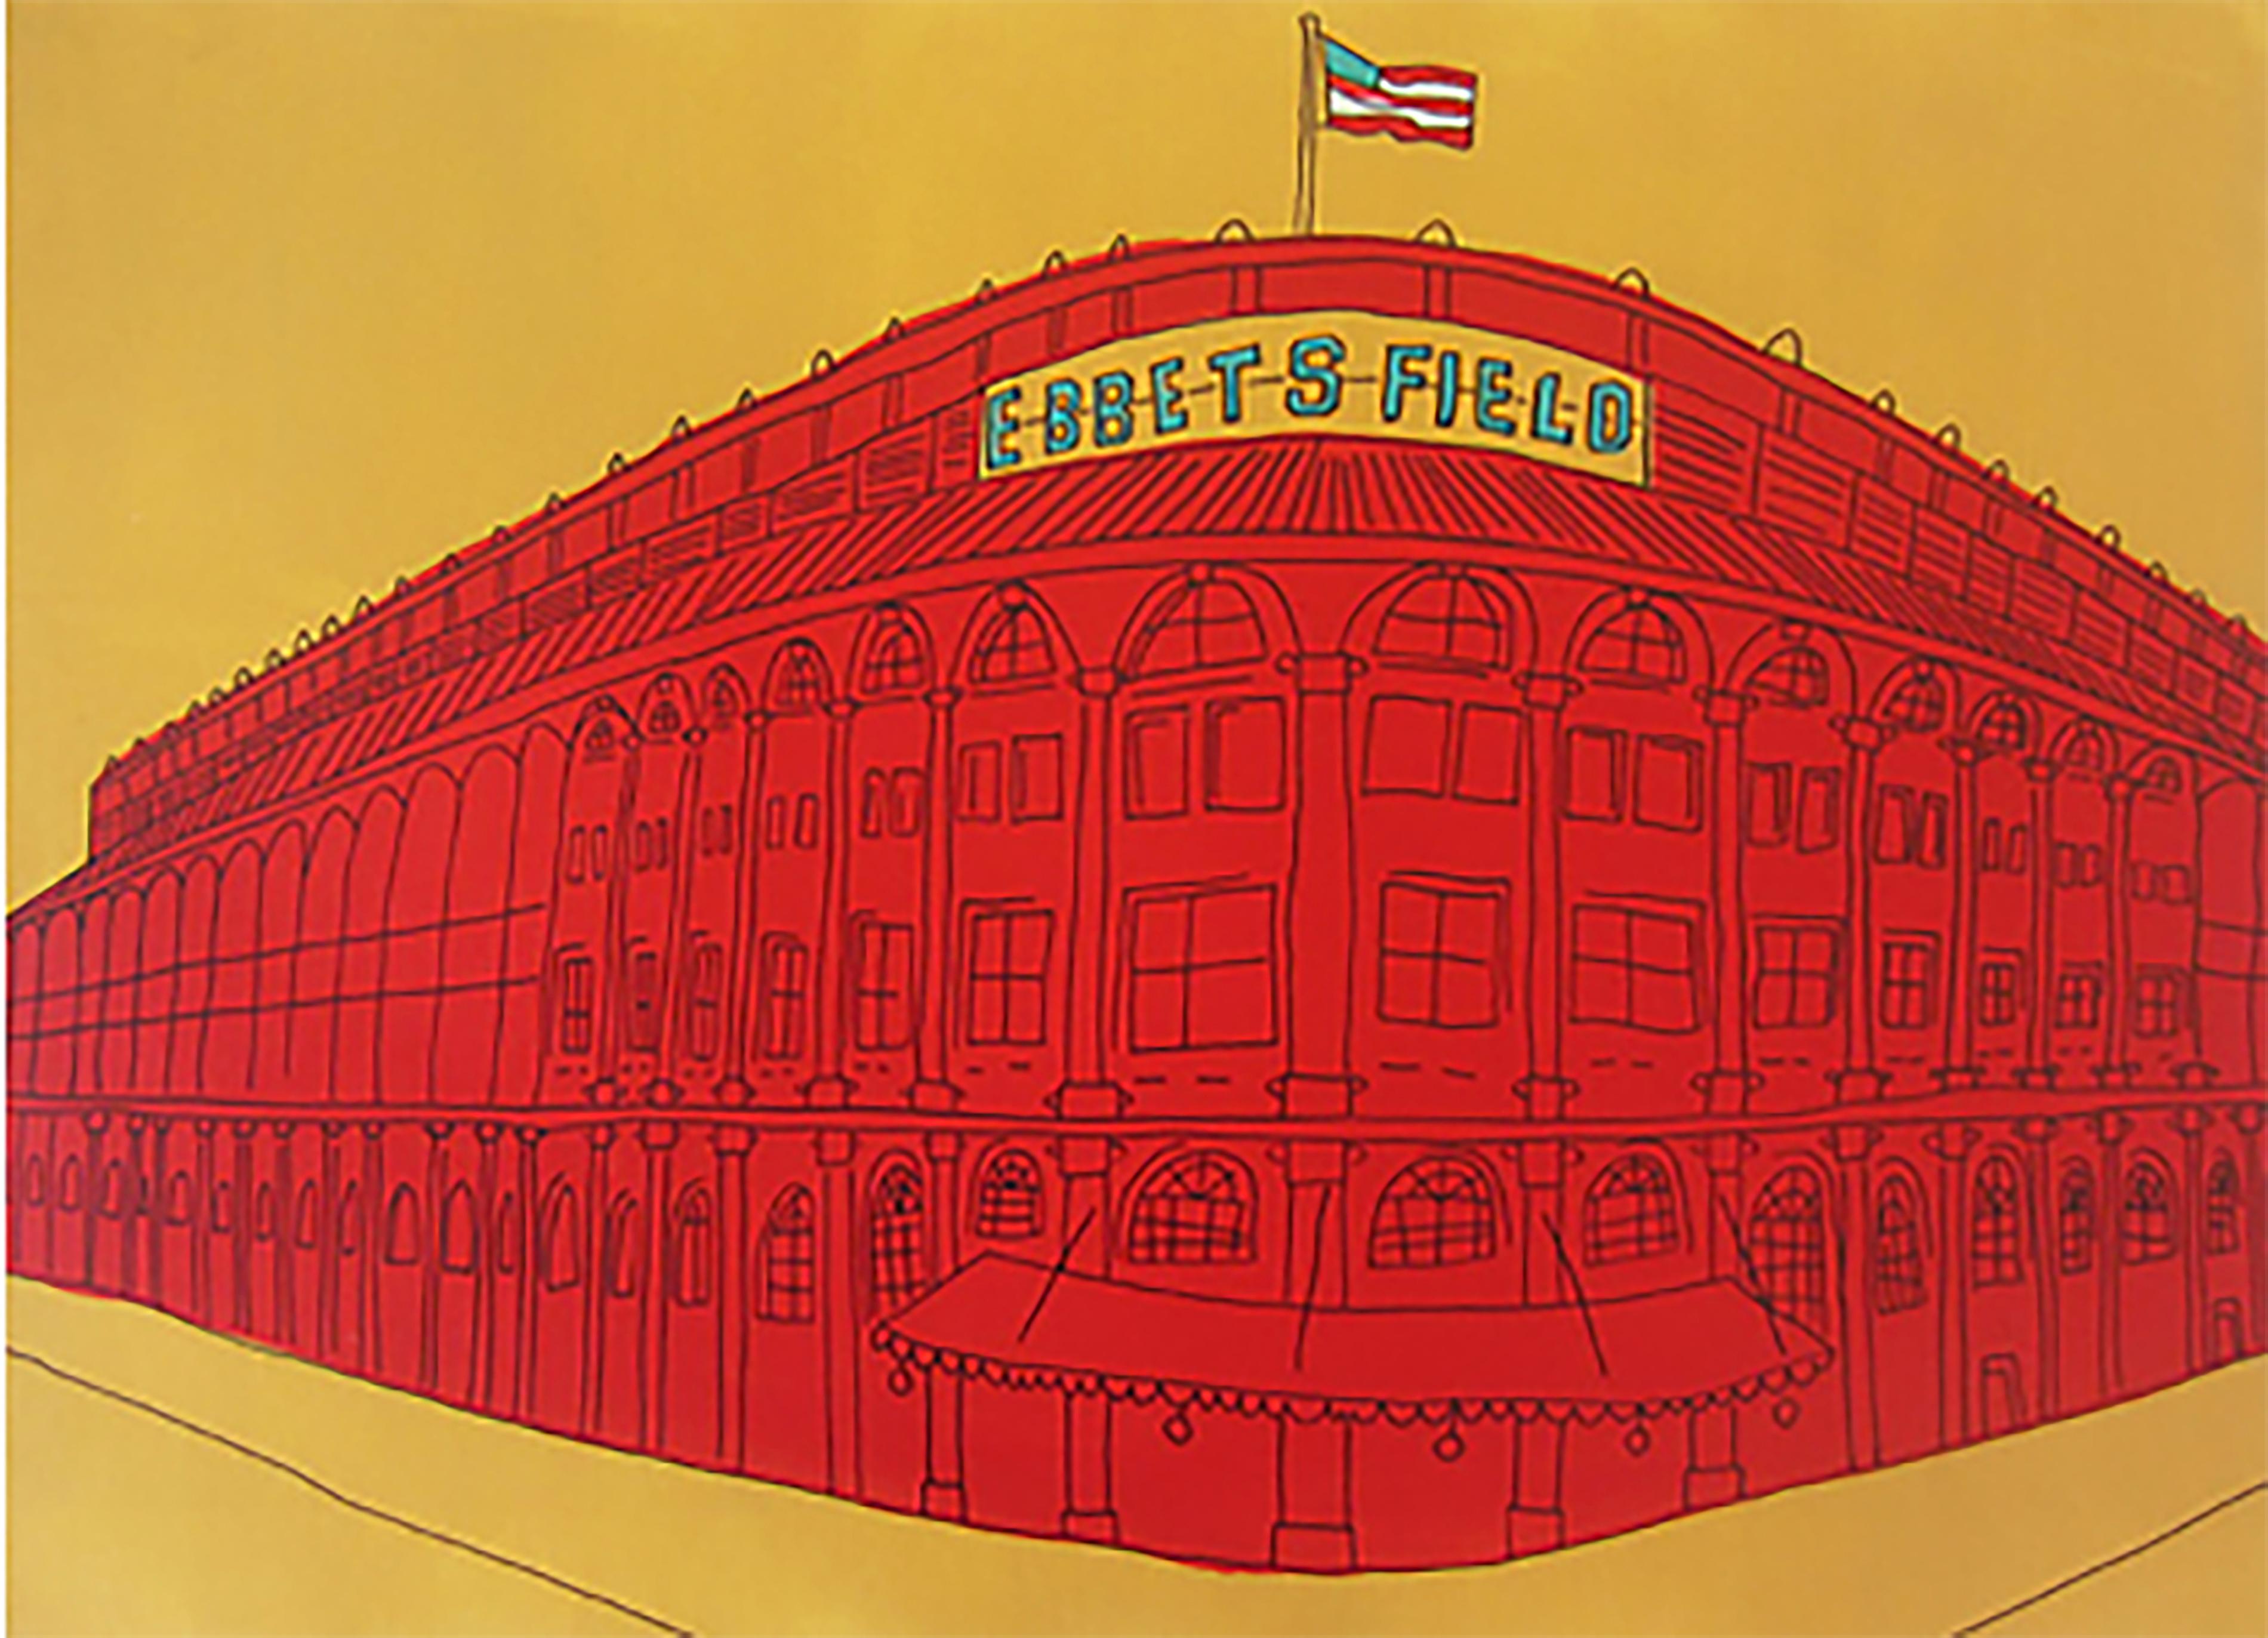 Marz Junior Figurative Painting - "NYC Ebbets Field Brooklyn"- Acrylic & Ink on Paper Framed